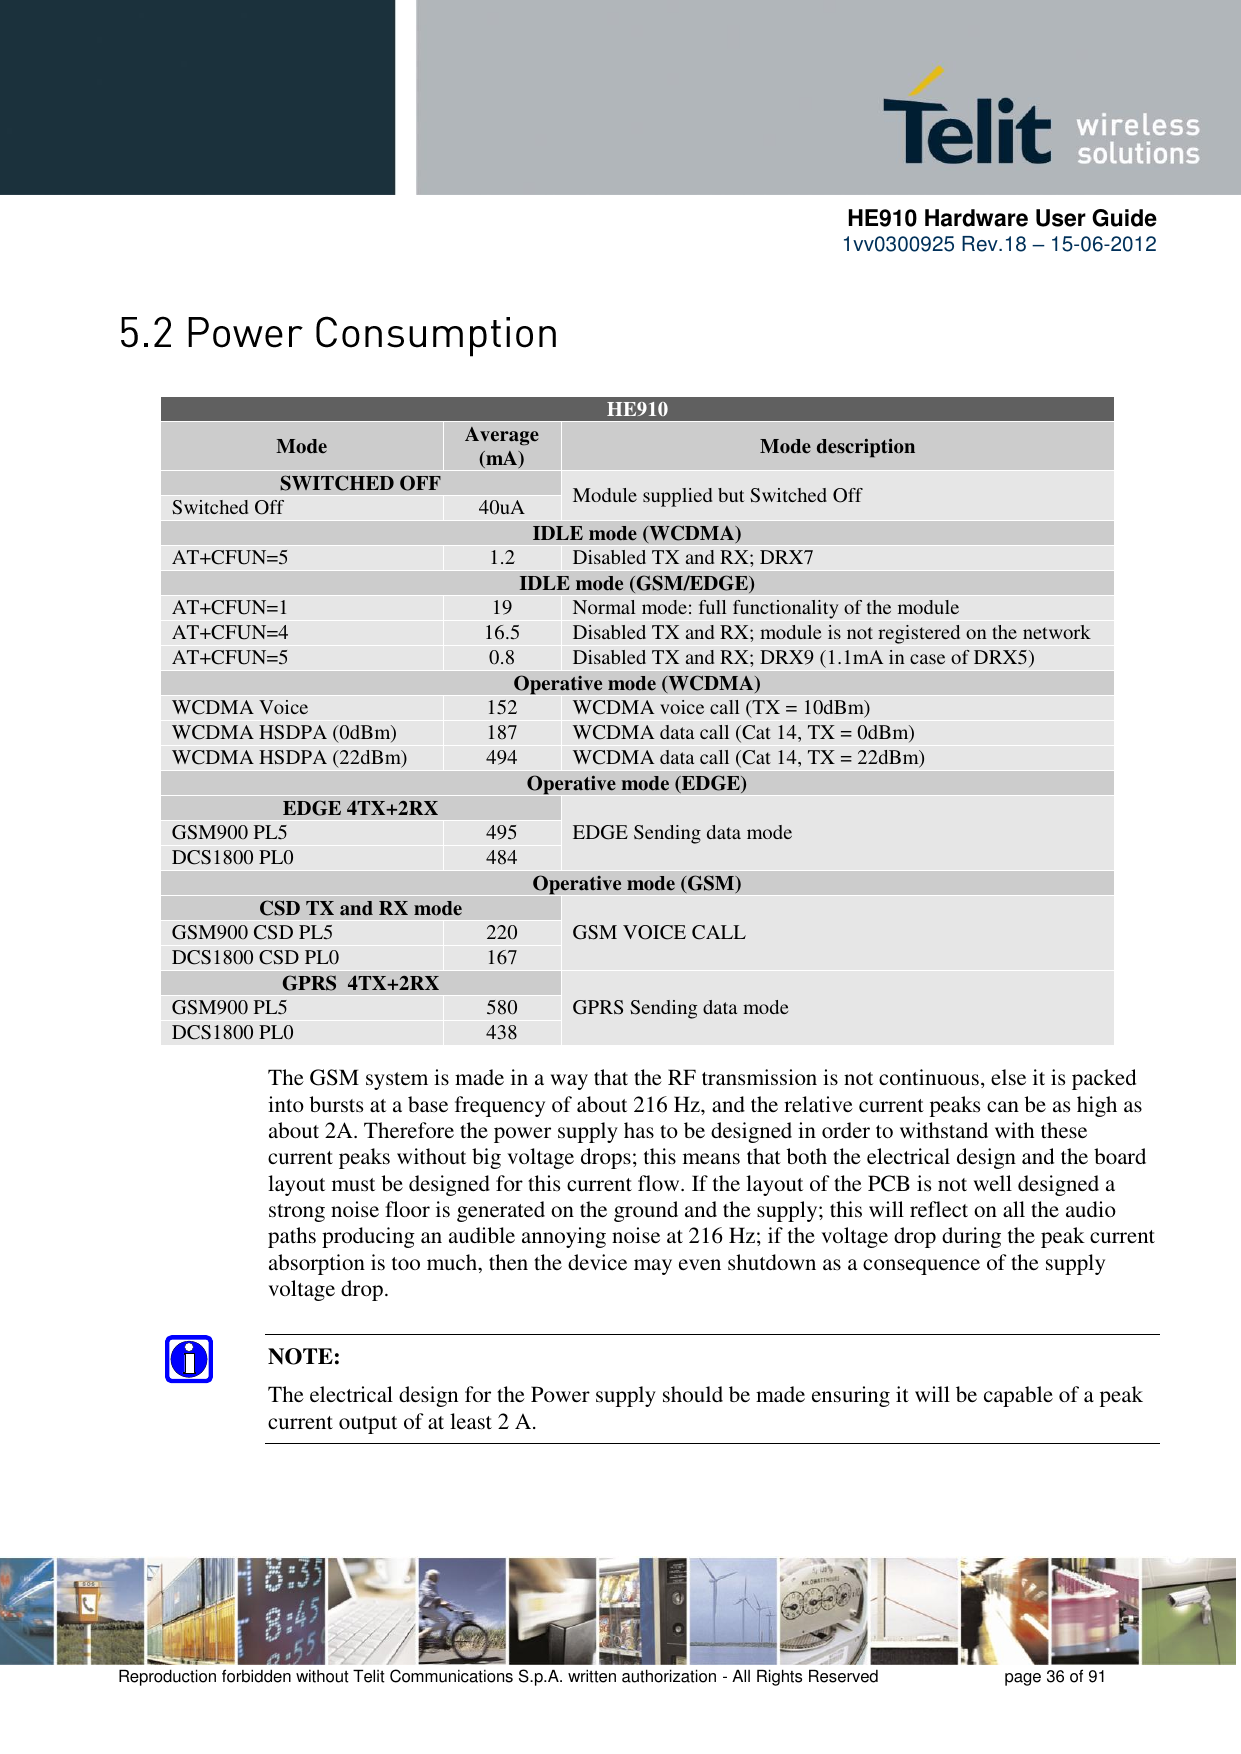      HE910 Hardware User Guide 1vv0300925 Rev.18 – 15-06-2012    Reproduction forbidden without Telit Communications S.p.A. written authorization - All Rights Reserved    page 36 of 91   HE910 Mode Average (mA) Mode description SWITCHED OFF Module supplied but Switched Off Switched Off 40uA IDLE mode (WCDMA) AT+CFUN=5 1.2 Disabled TX and RX; DRX7 IDLE mode (GSM/EDGE) AT+CFUN=1  19 Normal mode: full functionality of the module  AT+CFUN=4 16.5 Disabled TX and RX; module is not registered on the network AT+CFUN=5 0.8 Disabled TX and RX; DRX9 (1.1mA in case of DRX5) Operative mode (WCDMA) WCDMA Voice 152 WCDMA voice call (TX = 10dBm) WCDMA HSDPA (0dBm) 187 WCDMA data call (Cat 14, TX = 0dBm) WCDMA HSDPA (22dBm) 494 WCDMA data call (Cat 14, TX = 22dBm) Operative mode (EDGE) EDGE 4TX+2RX EDGE Sending data mode GSM900 PL5 495 DCS1800 PL0 484 Operative mode (GSM) CSD TX and RX mode GSM VOICE CALL GSM900 CSD PL5 220 DCS1800 CSD PL0 167 GPRS  4TX+2RX GPRS Sending data mode GSM900 PL5 580 DCS1800 PL0 438  The GSM system is made in a way that the RF transmission is not continuous, else it is packed into bursts at a base frequency of about 216 Hz, and the relative current peaks can be as high as about 2A. Therefore the power supply has to be designed in order to withstand with these current peaks without big voltage drops; this means that both the electrical design and the board layout must be designed for this current flow. If the layout of the PCB is not well designed a strong noise floor is generated on the ground and the supply; this will reflect on all the audio paths producing an audible annoying noise at 216 Hz; if the voltage drop during the peak current absorption is too much, then the device may even shutdown as a consequence of the supply voltage drop.  NOTE: The electrical design for the Power supply should be made ensuring it will be capable of a peak current output of at least 2 A. 